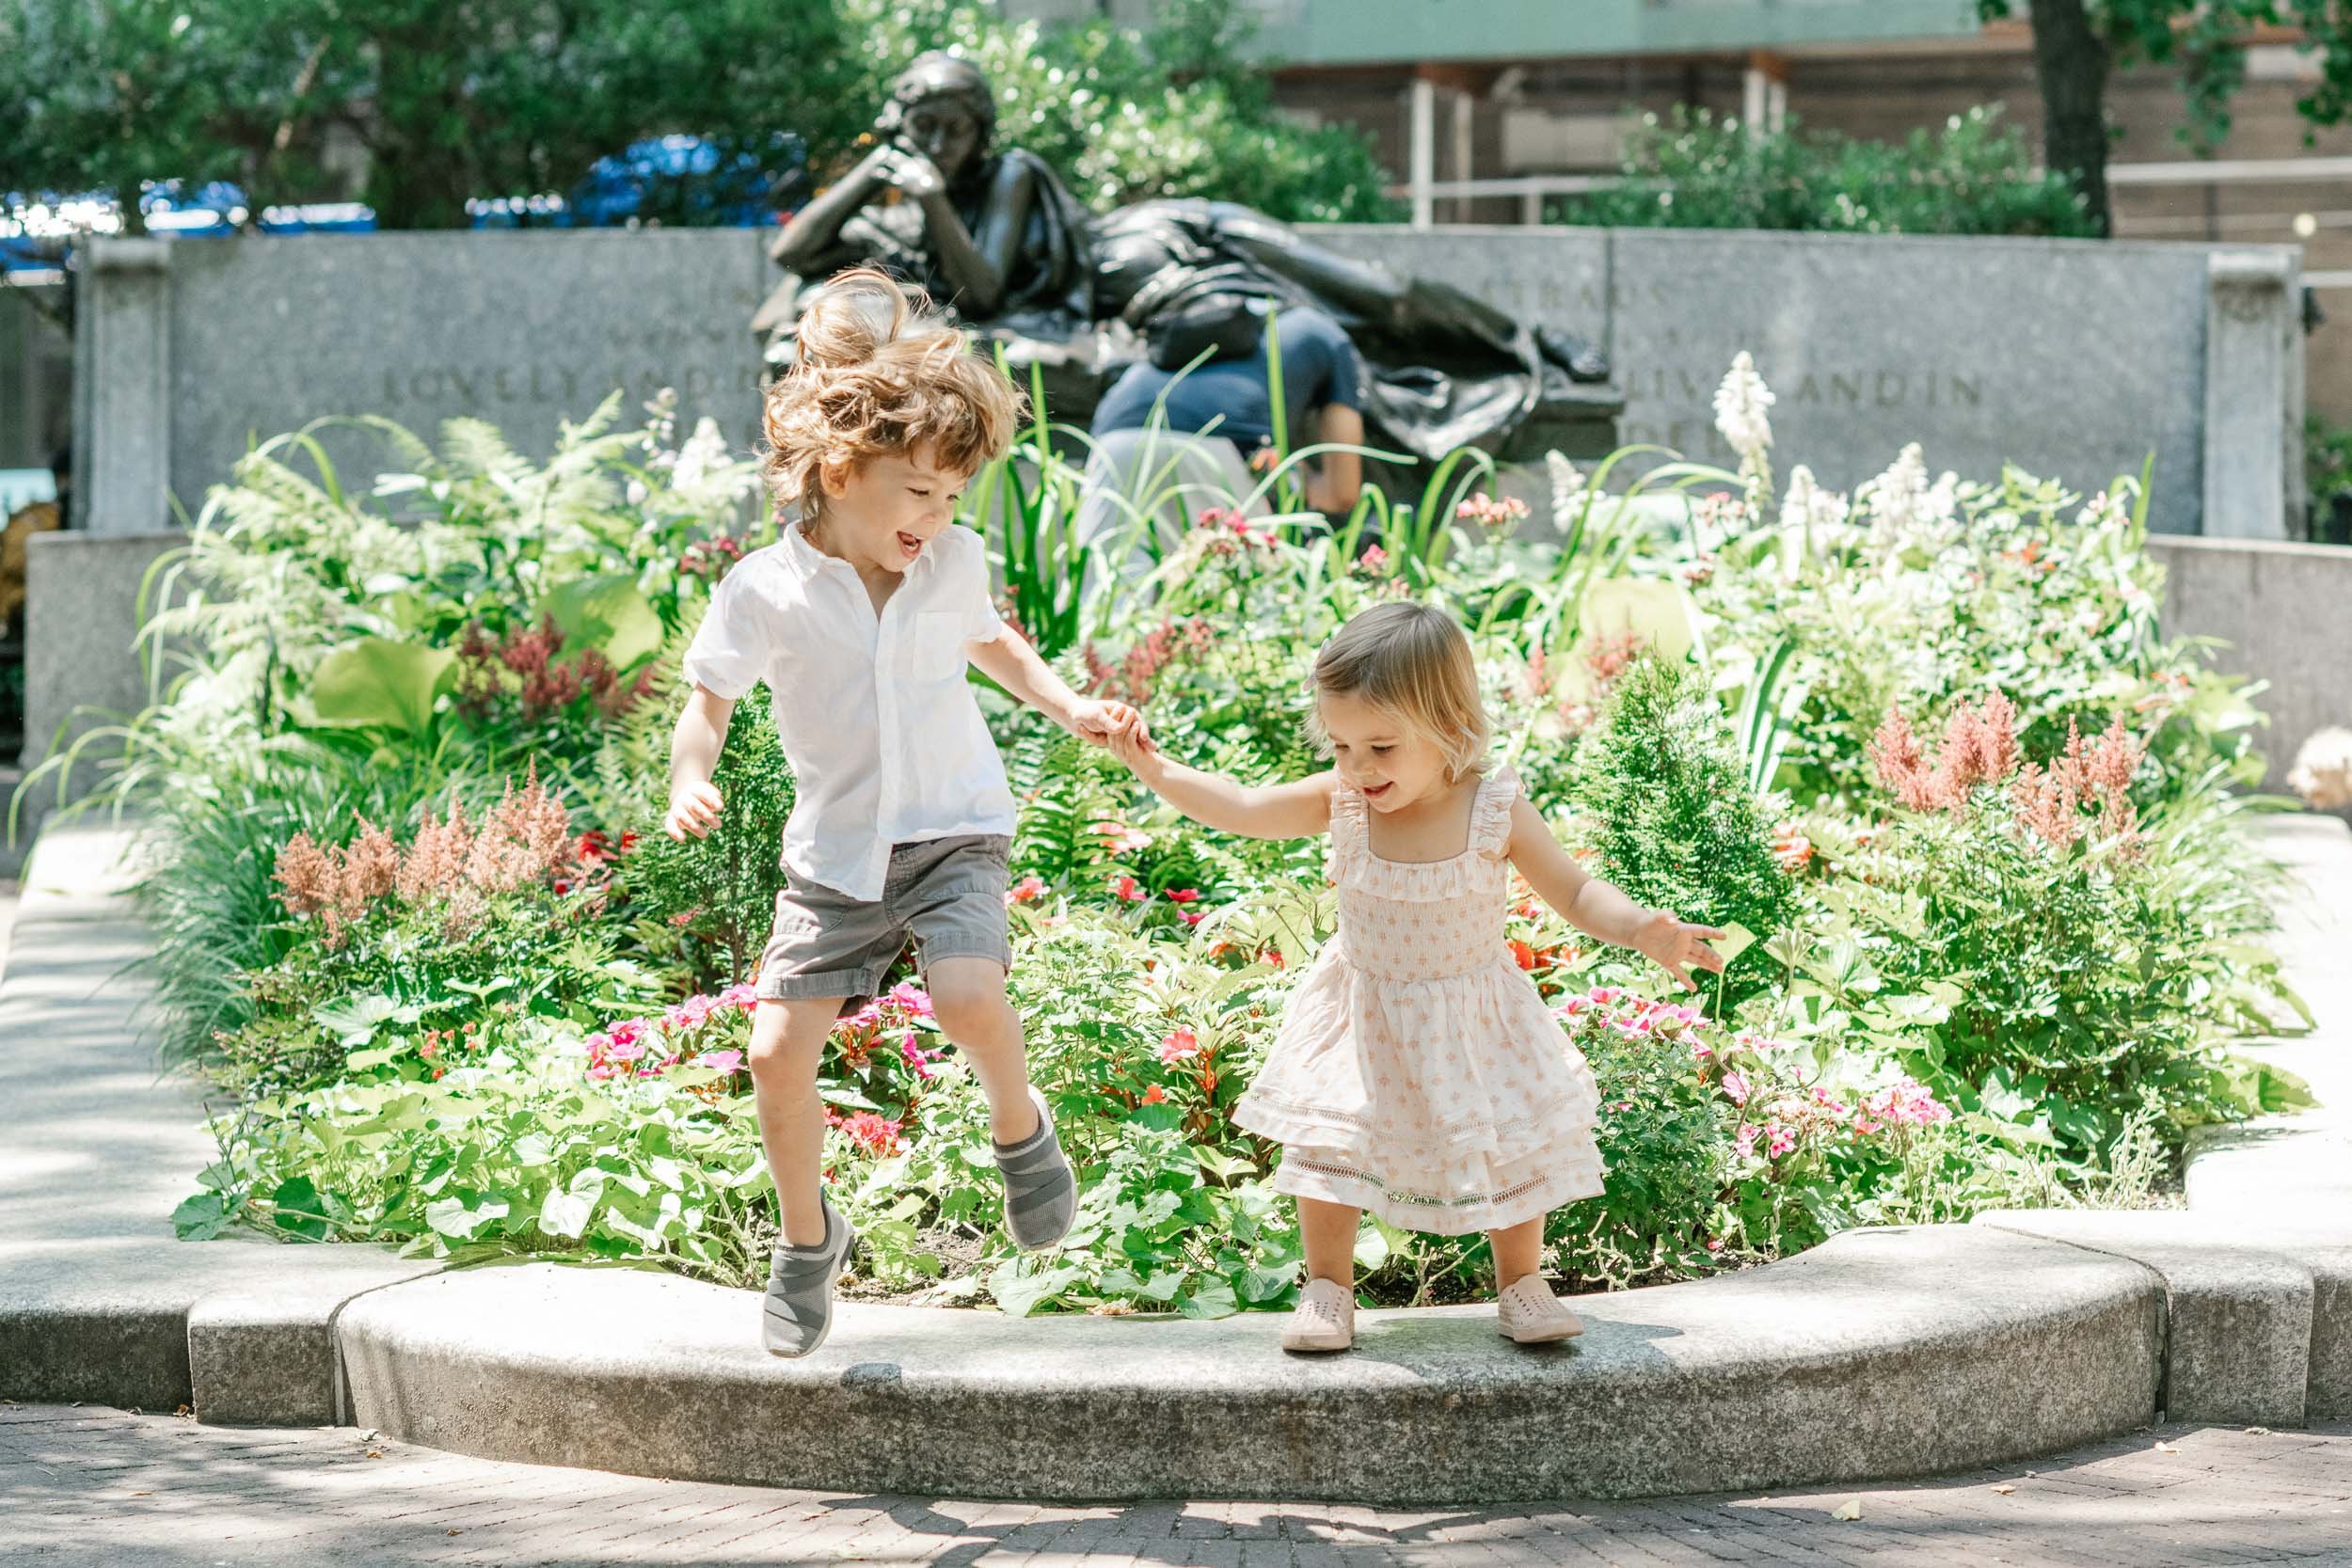  Nicole Hawkins Photography captures a boy and girl jumping off a flower bed holding hands. NYC photography #NicoleHawkinsPhotograaphy #NicoleHawkinsChildren #NewYorkPortraits #KidsinNewYork #ChildrensPortraits #lifestyleportraits 